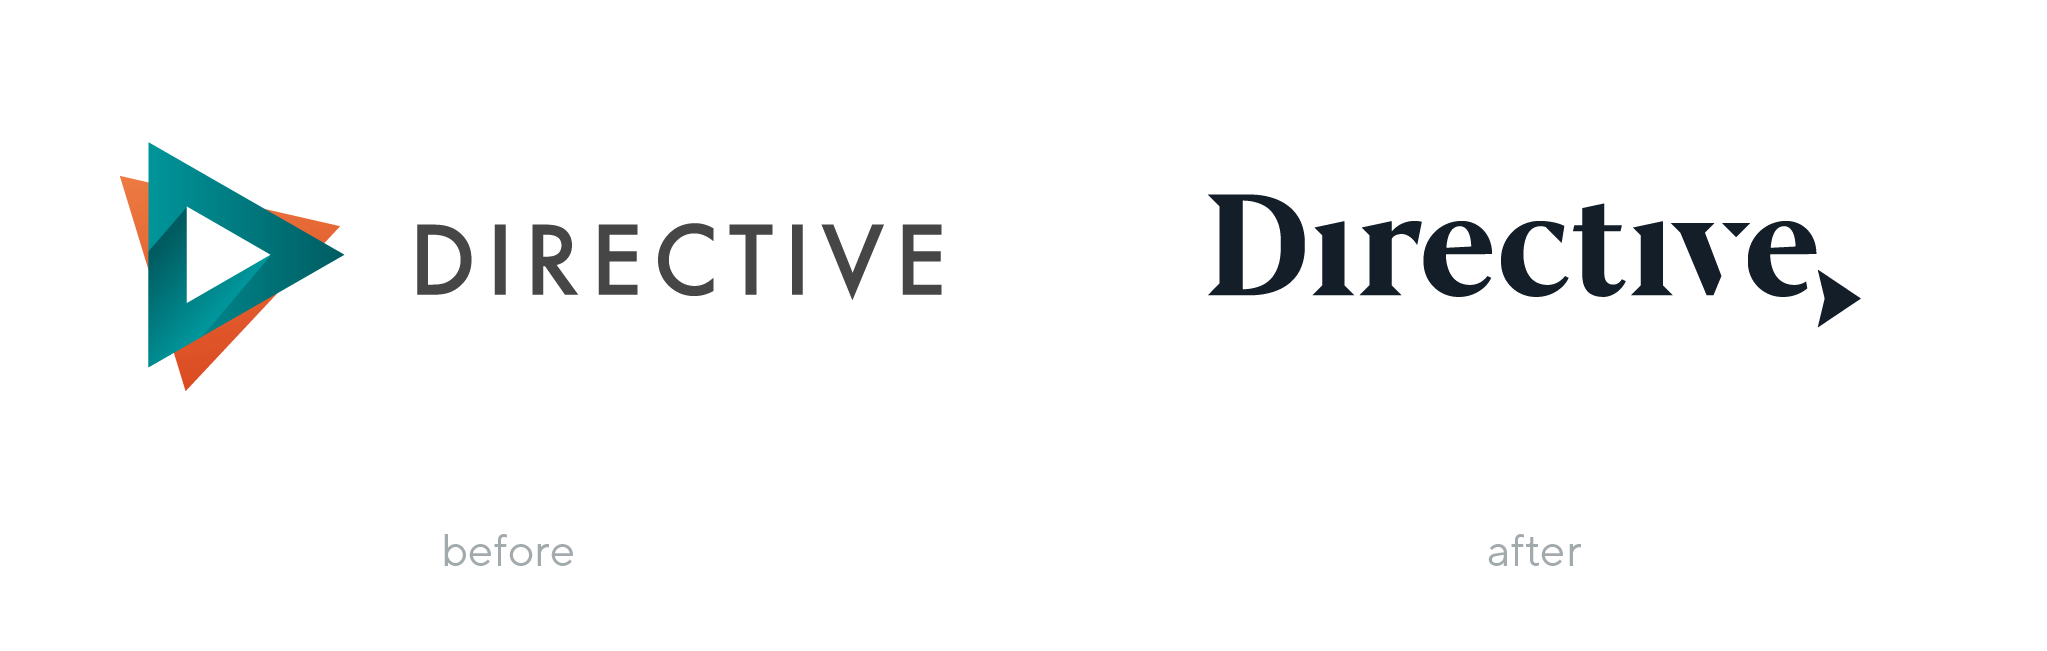 Directive Consulting logo before and after rebranding